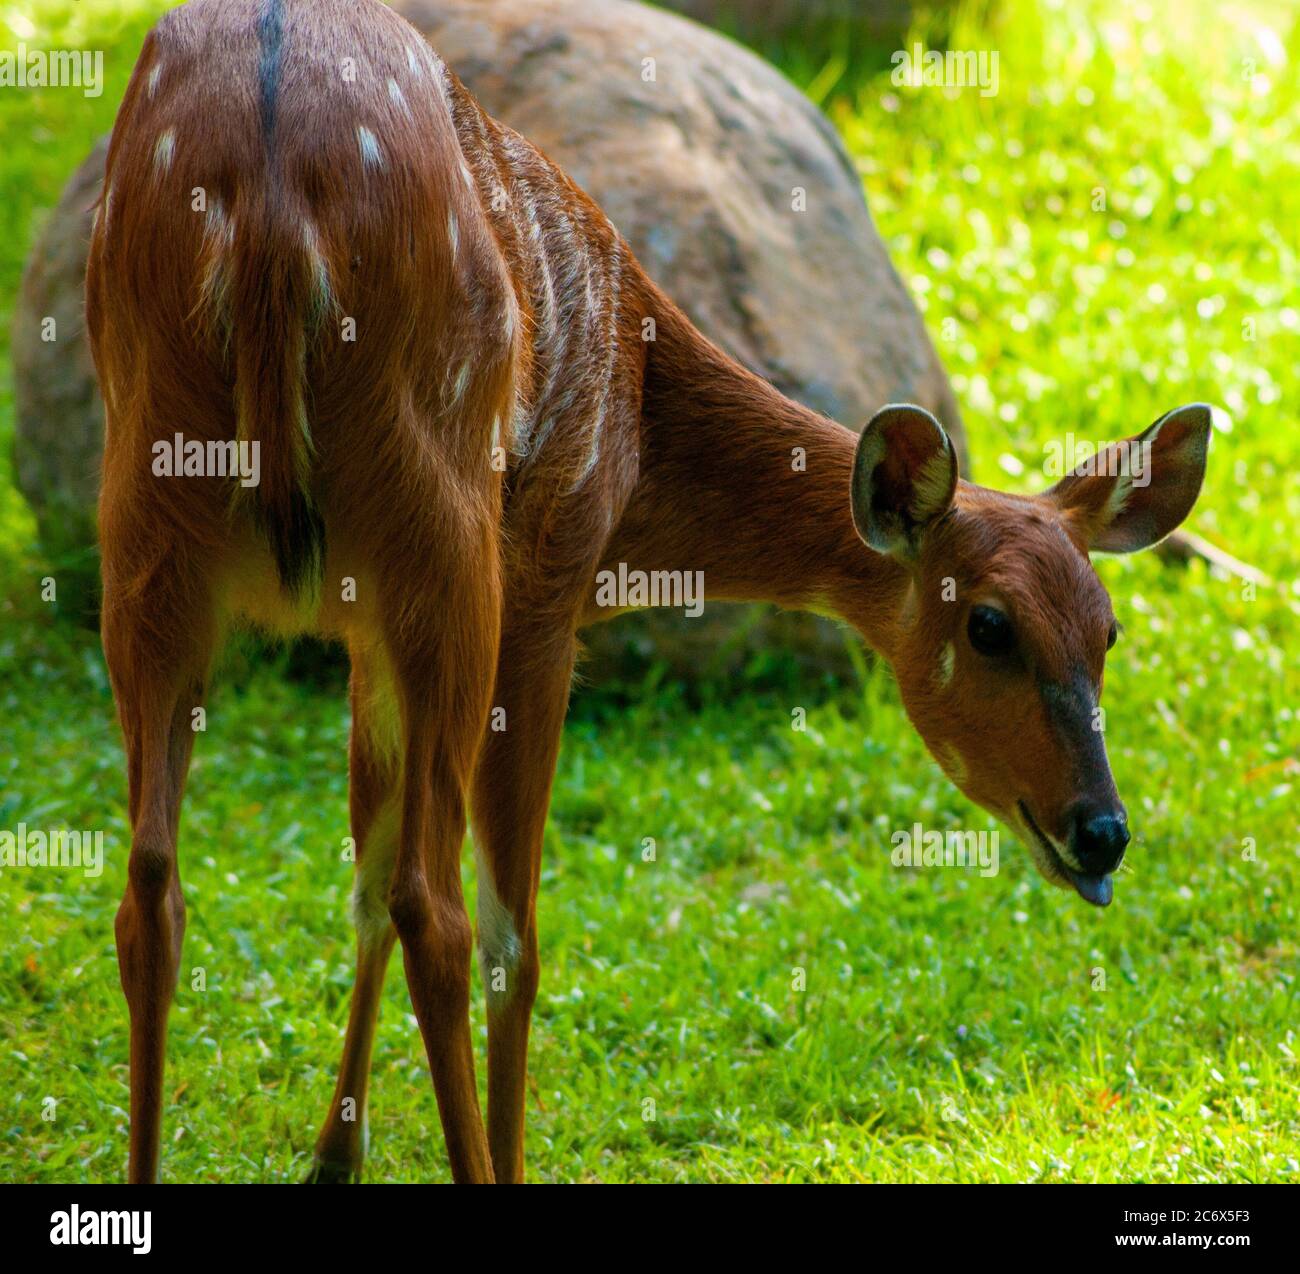 Small Deer Poking out Tongue Stock Photo - Alamy